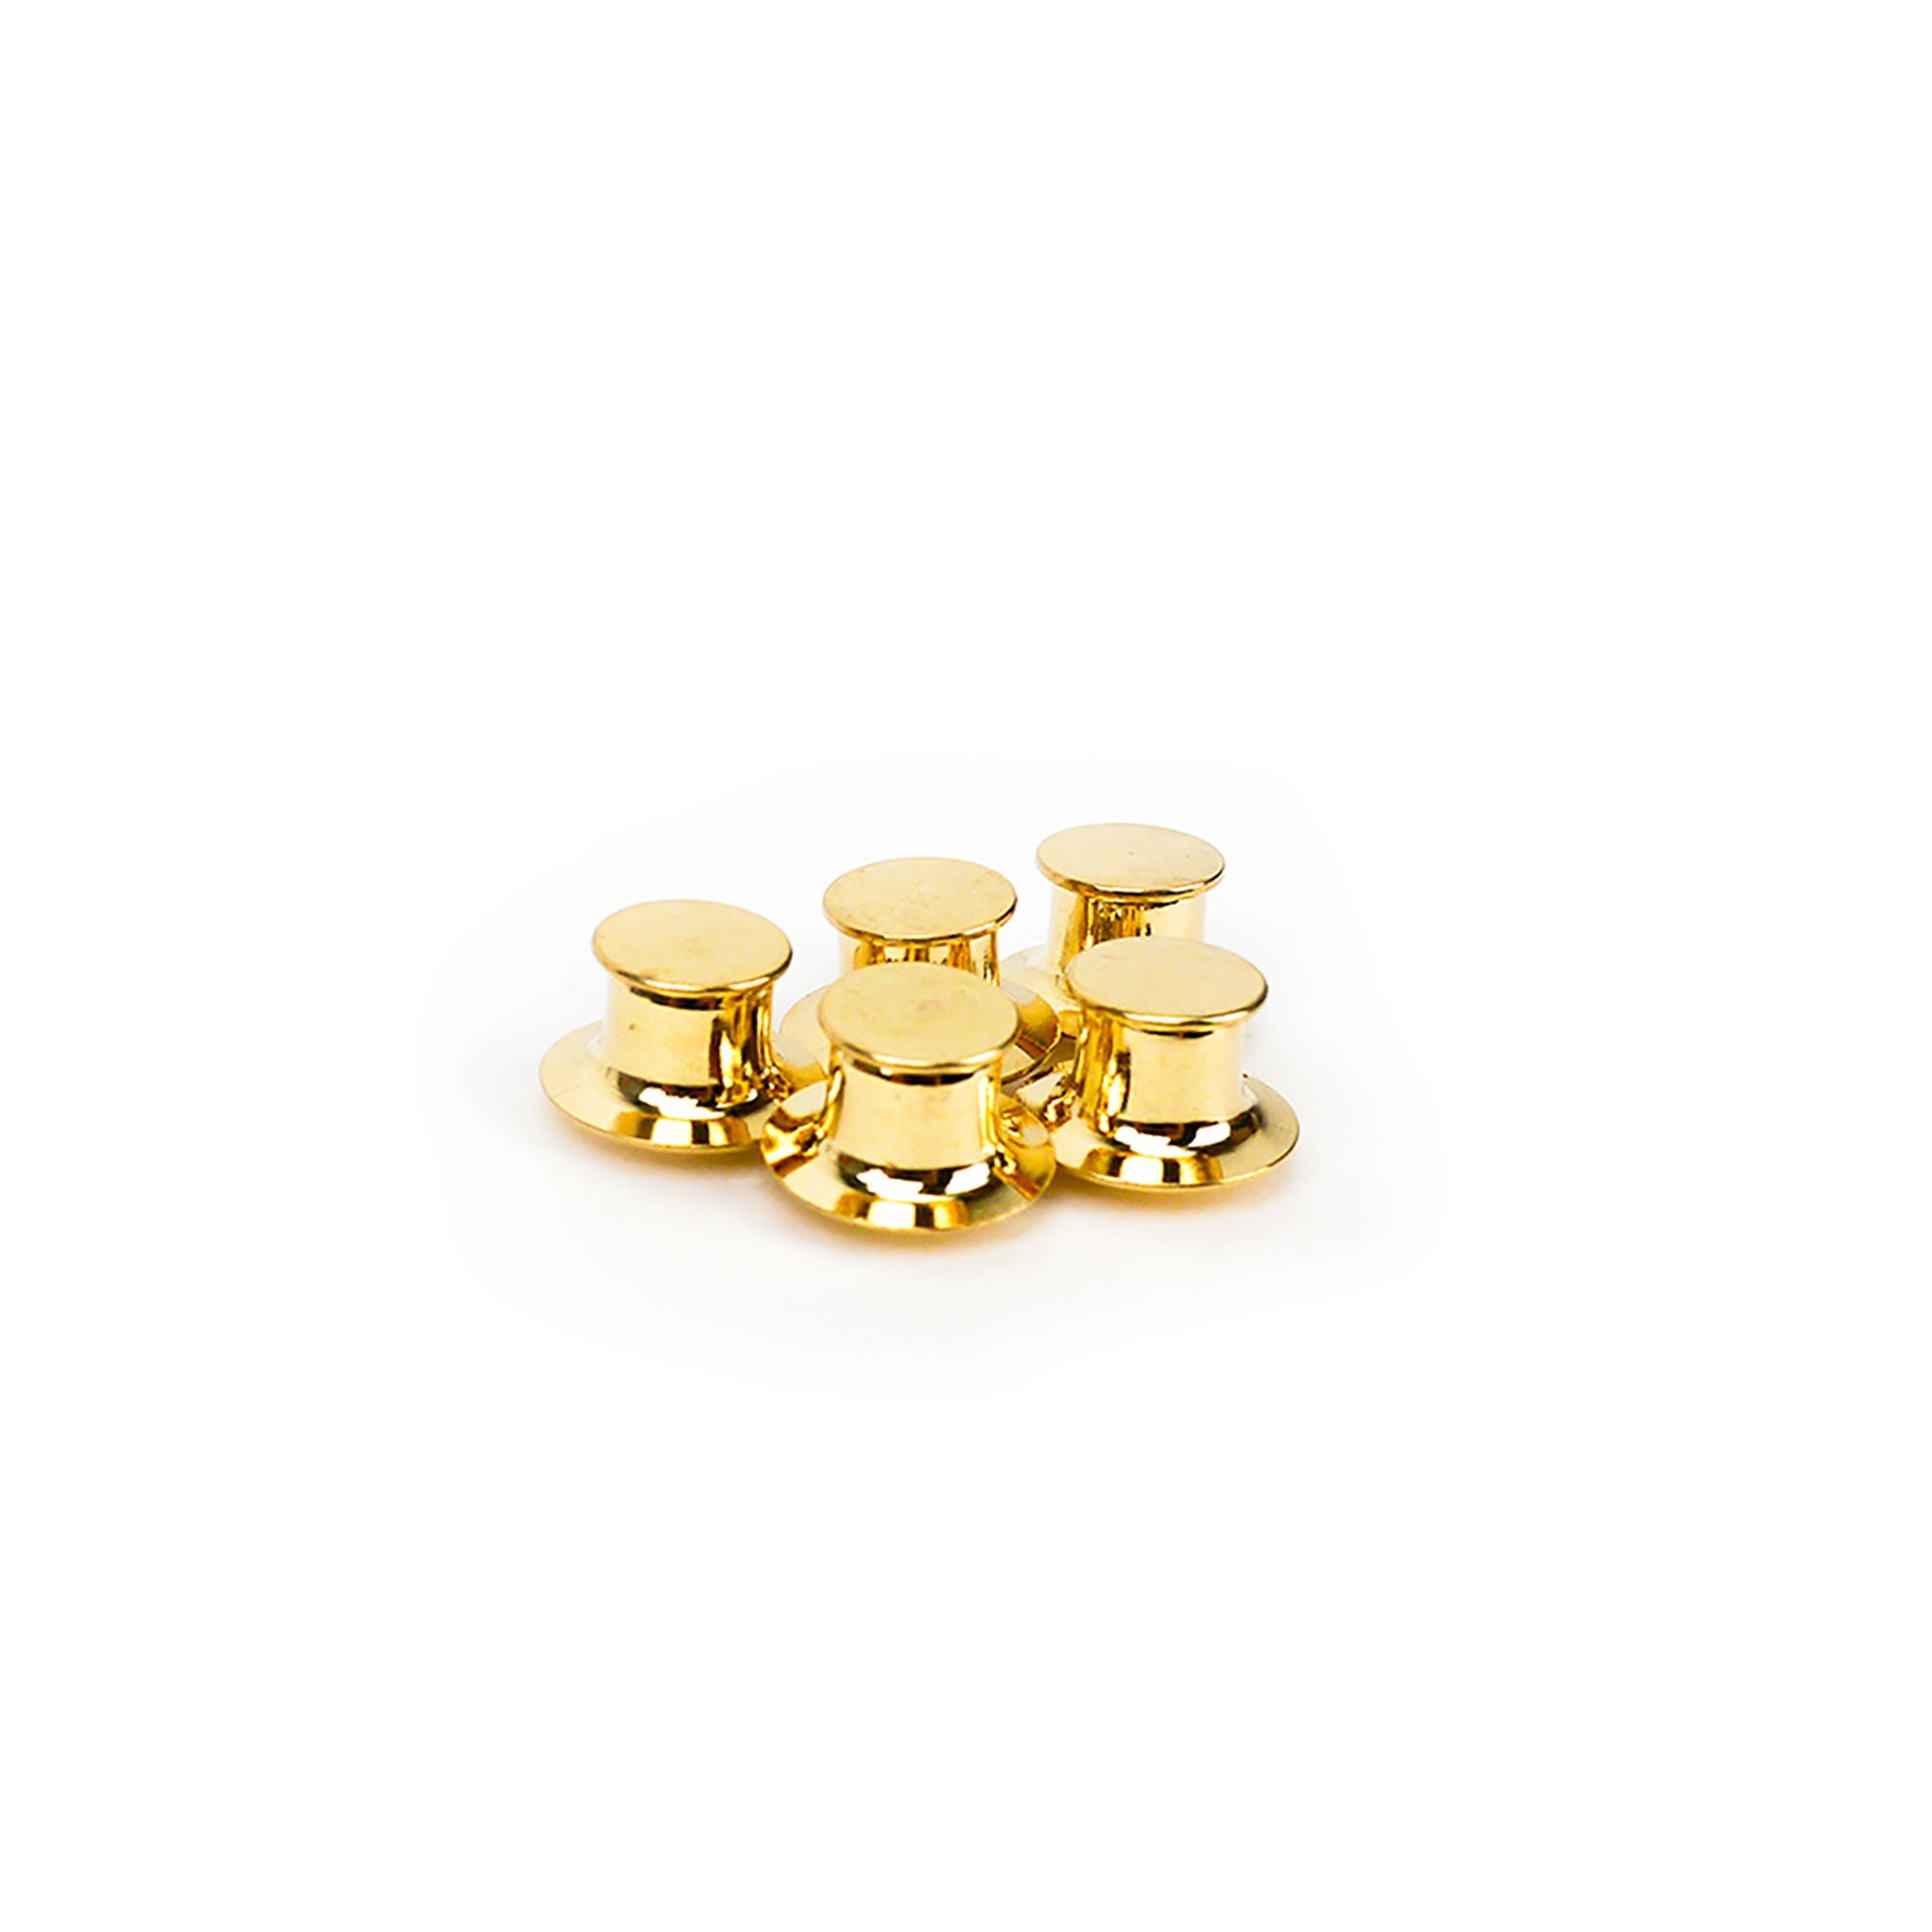 Gold Deluxe Locking Pin Backs (Backing Clasp) for Enamel Pins